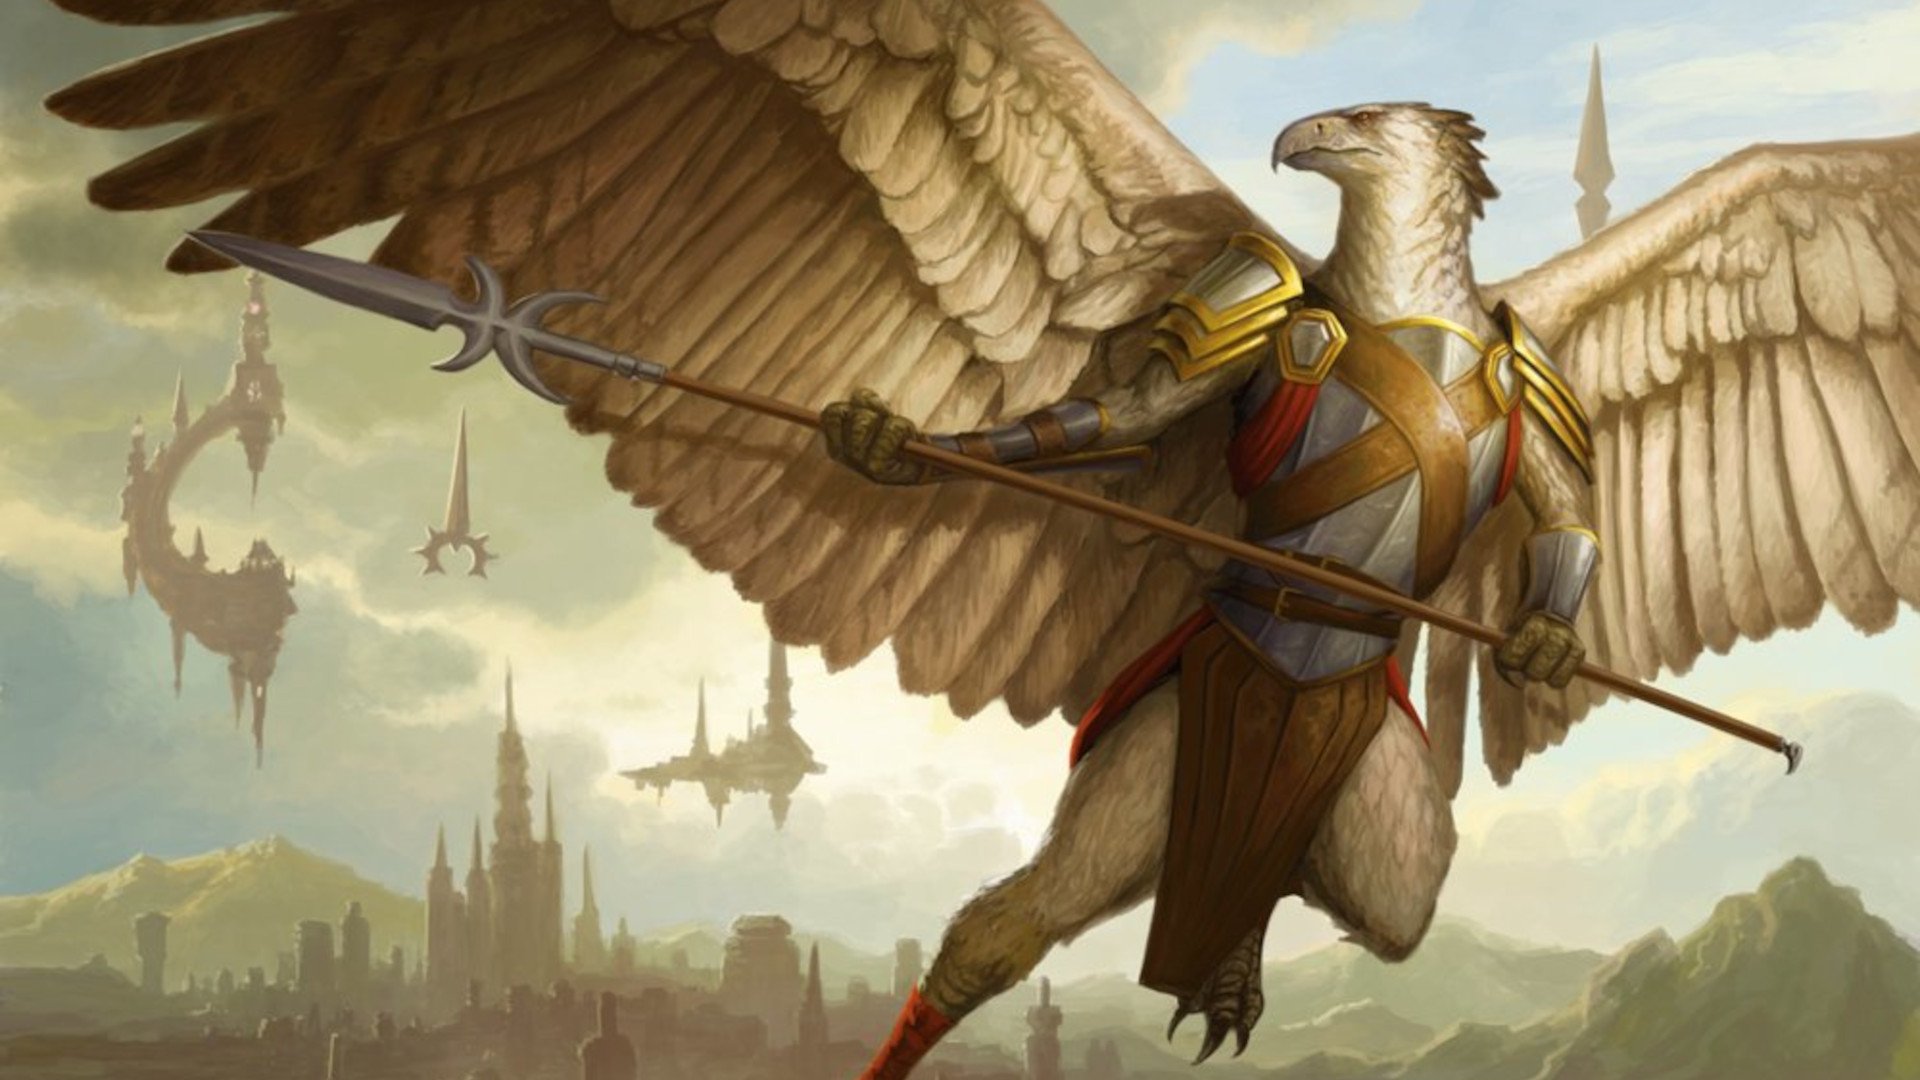 DnD Aarakocra 5E race guide - Wizards of the Coast artwork showing an aarakocra warrior with a spear